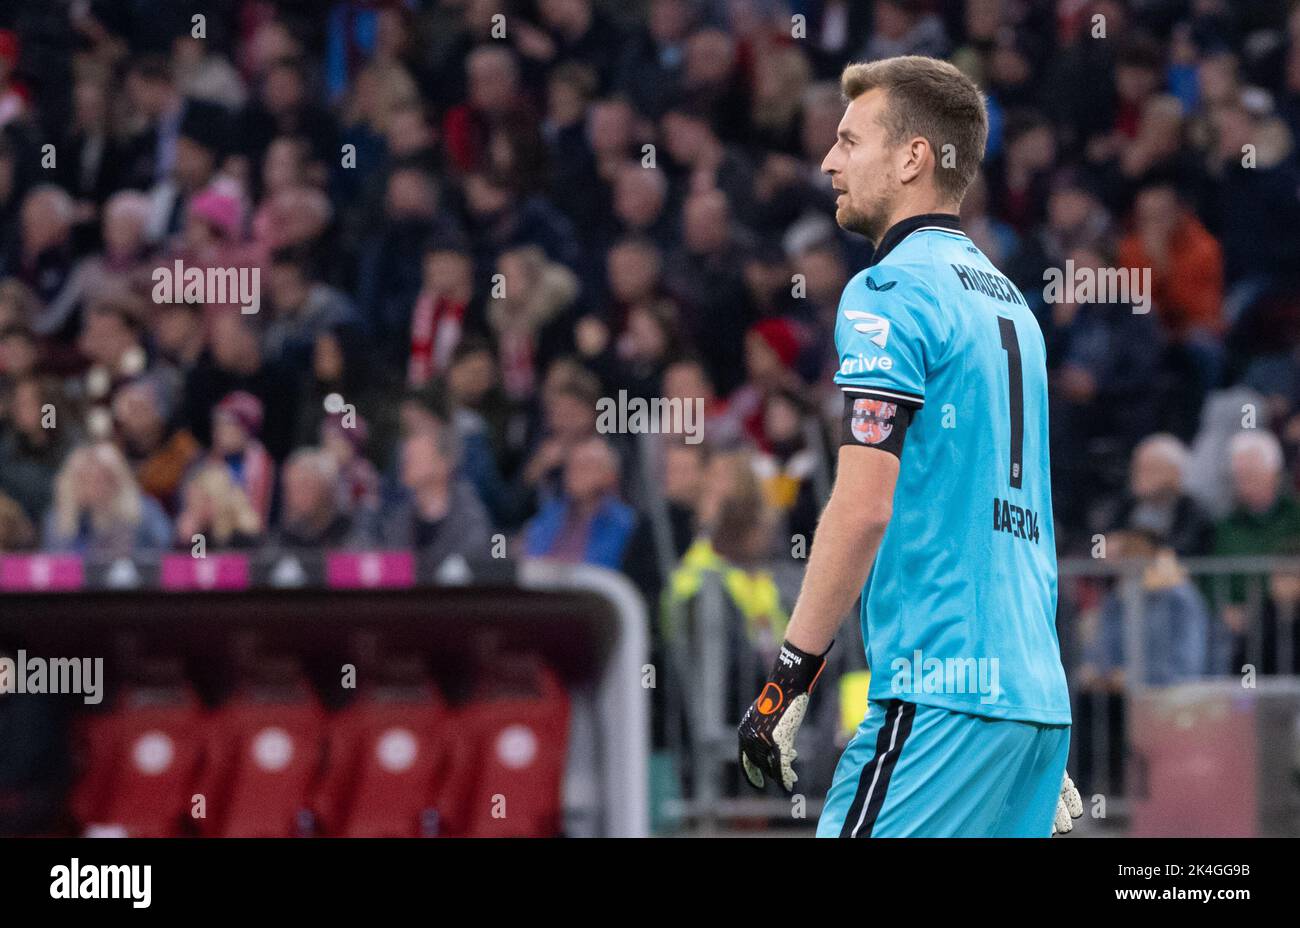 Munich, Germany. 30th Sep, 2022. Soccer: Bundesliga, Bayern Munich - Bayer Leverkusen, matchday 8 at Allianz Arena. Lukas Hradecky of Leverkusen is on the pitch. Credit: Sven Hoppe/dpa - IMPORTANT NOTE: In accordance with the requirements of the DFL Deutsche Fußball Liga and the DFB Deutscher Fußball-Bund, it is prohibited to use or have used photographs taken in the stadium and/or of the match in the form of sequence pictures and/or video-like photo series./dpa/Alamy Live News Stock Photo